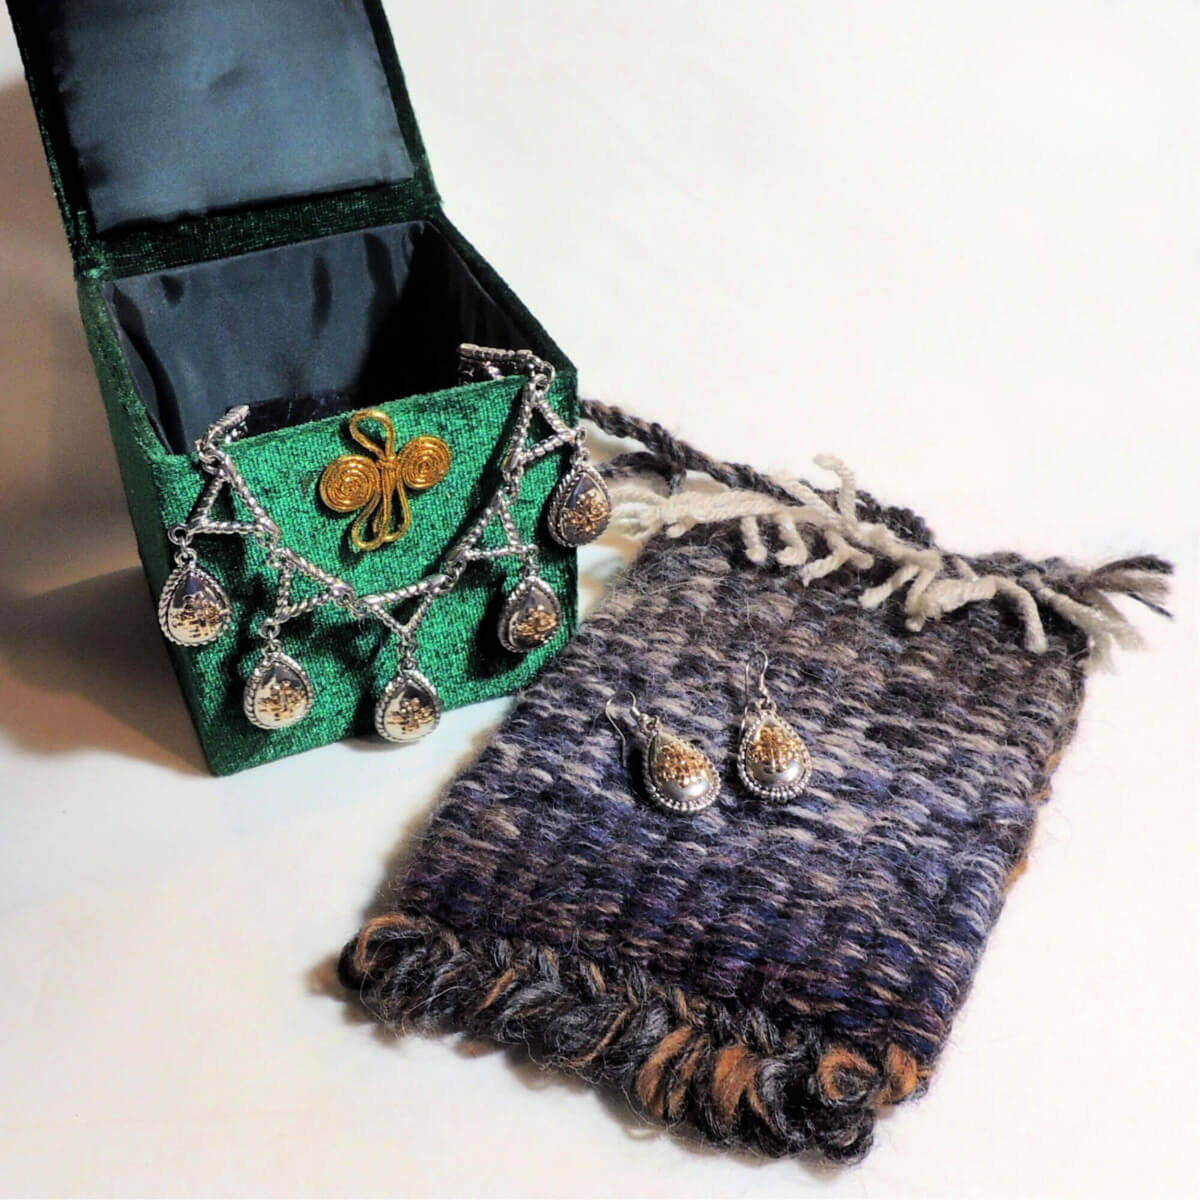 A small woven pouch in navy blue with bits of brown and cream. On top of it is a pair of silver and gold earrings. Next to the pouch is an open green velvet box with black lining, a necklace that matches the earrings hangs out of the box.